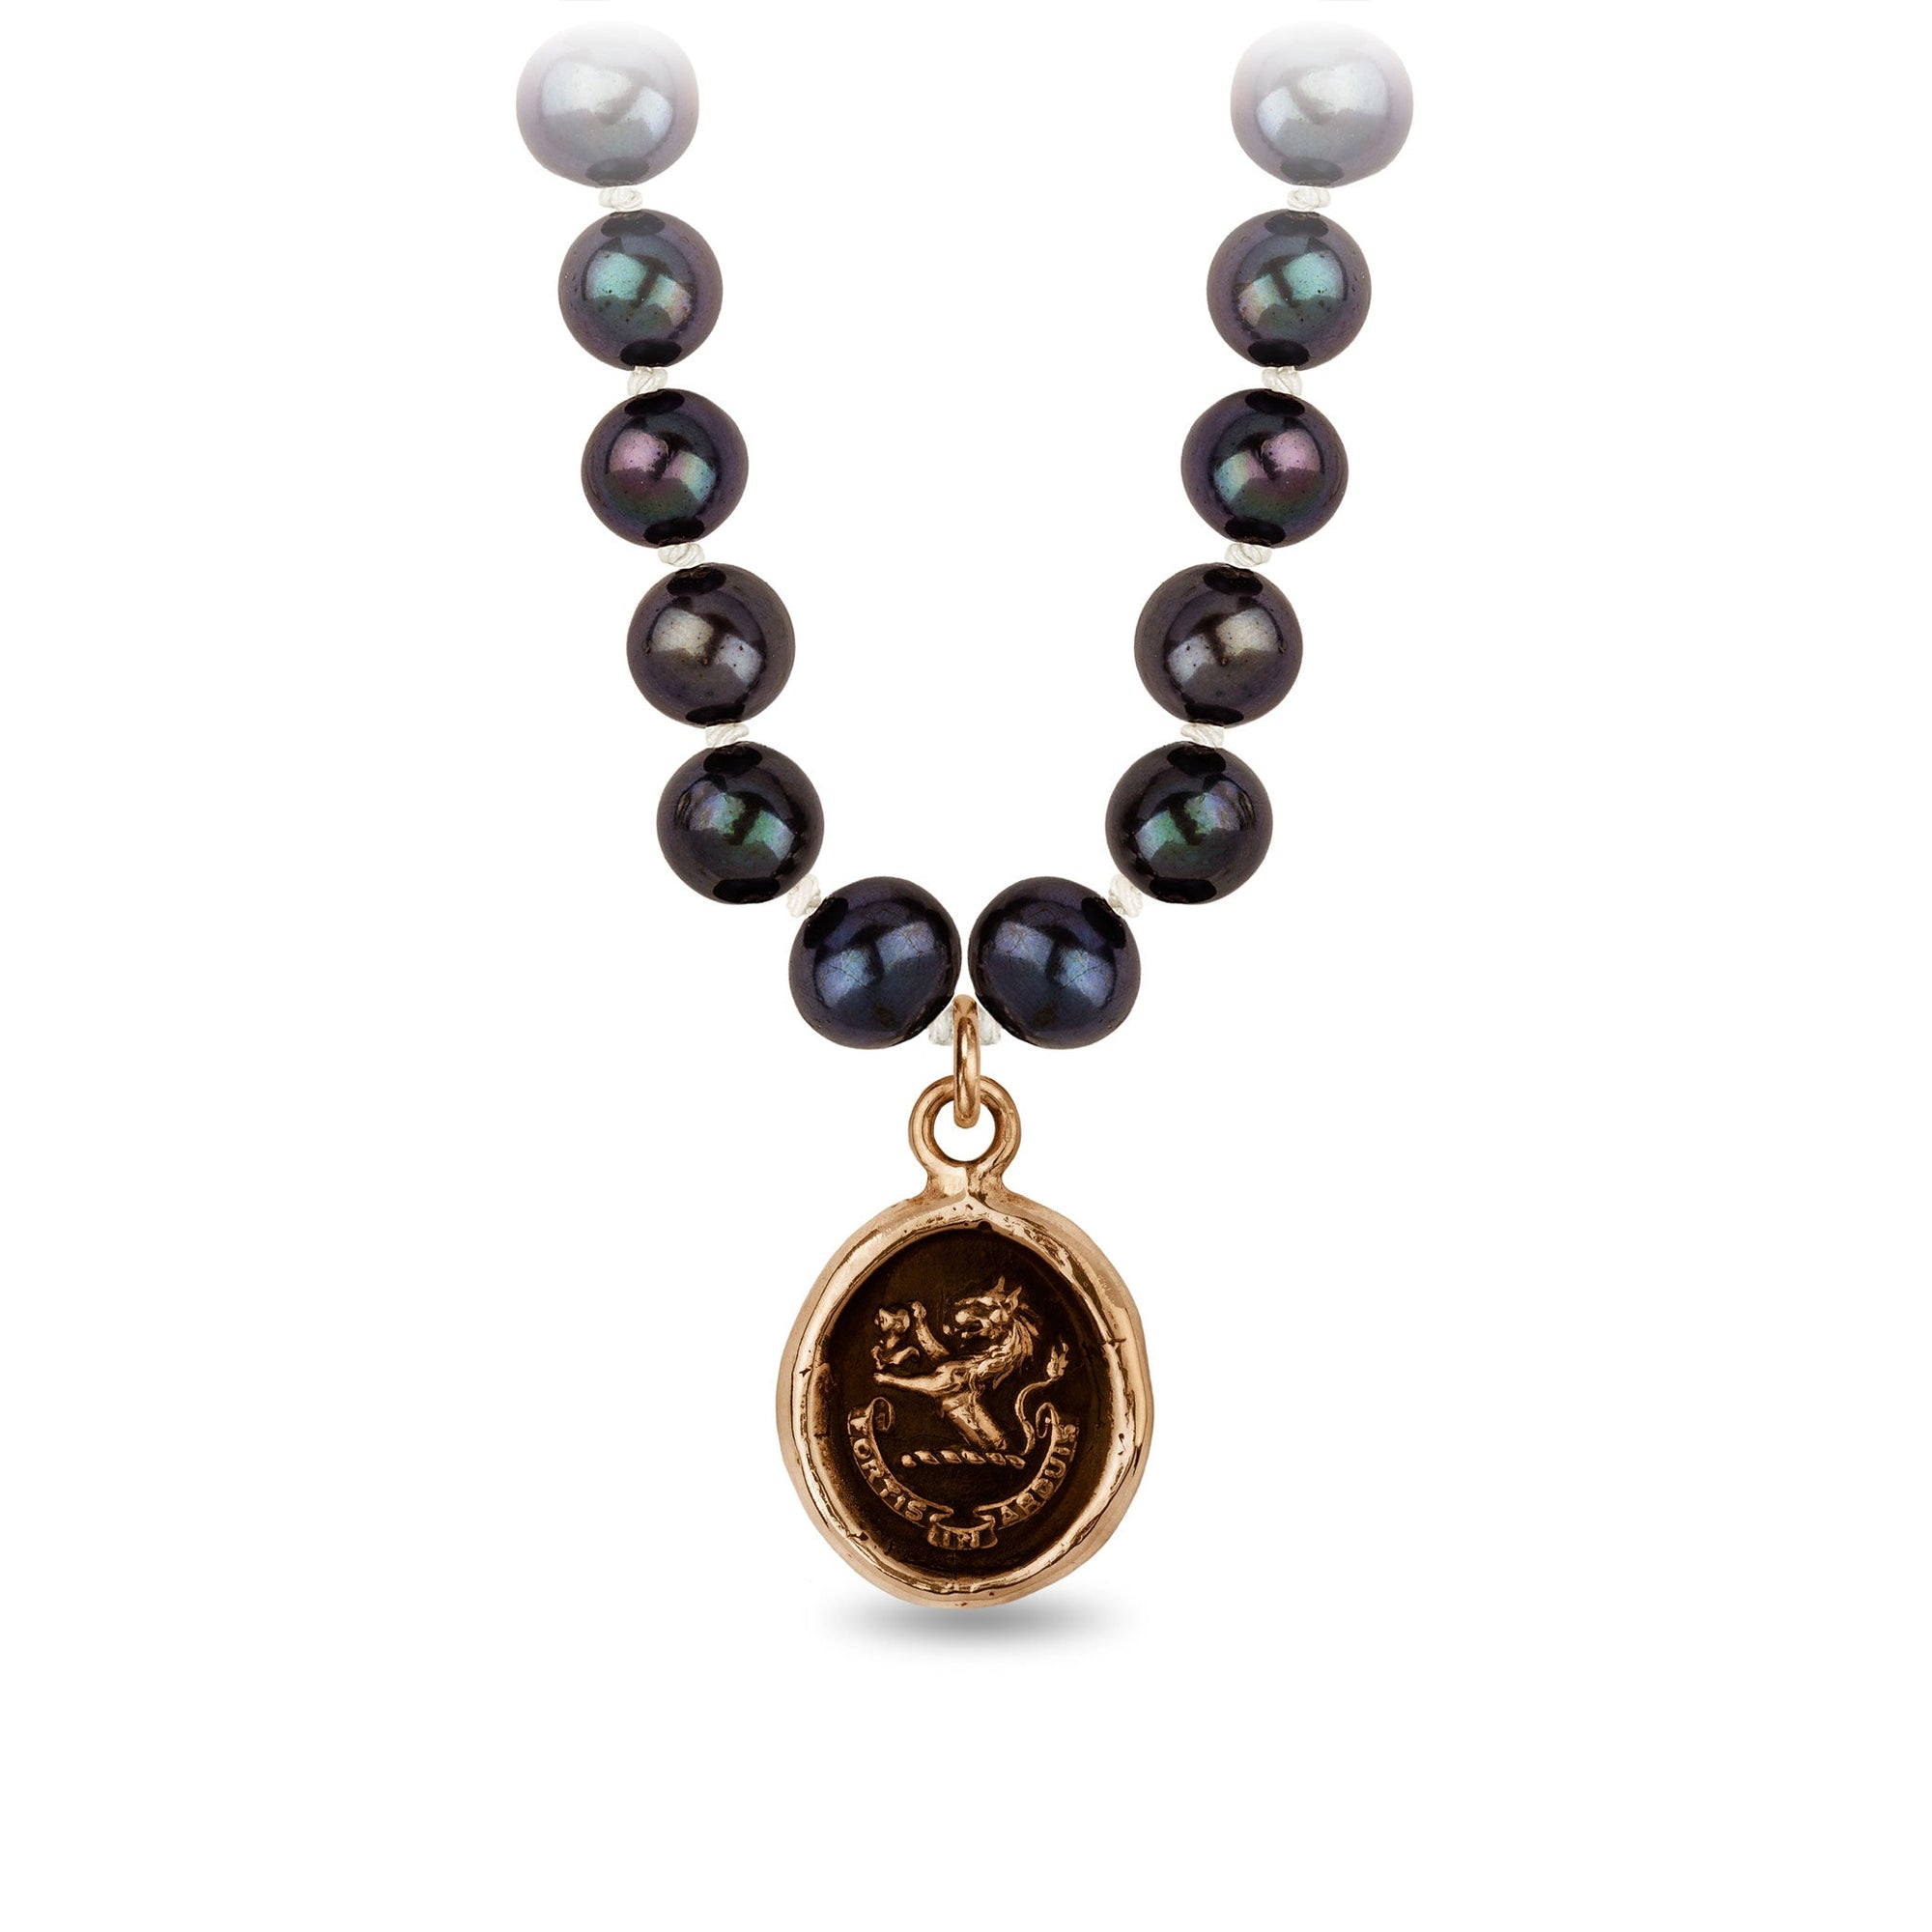 Brave In Difficulties Freshwater Pearl Necklace - Peacock Black